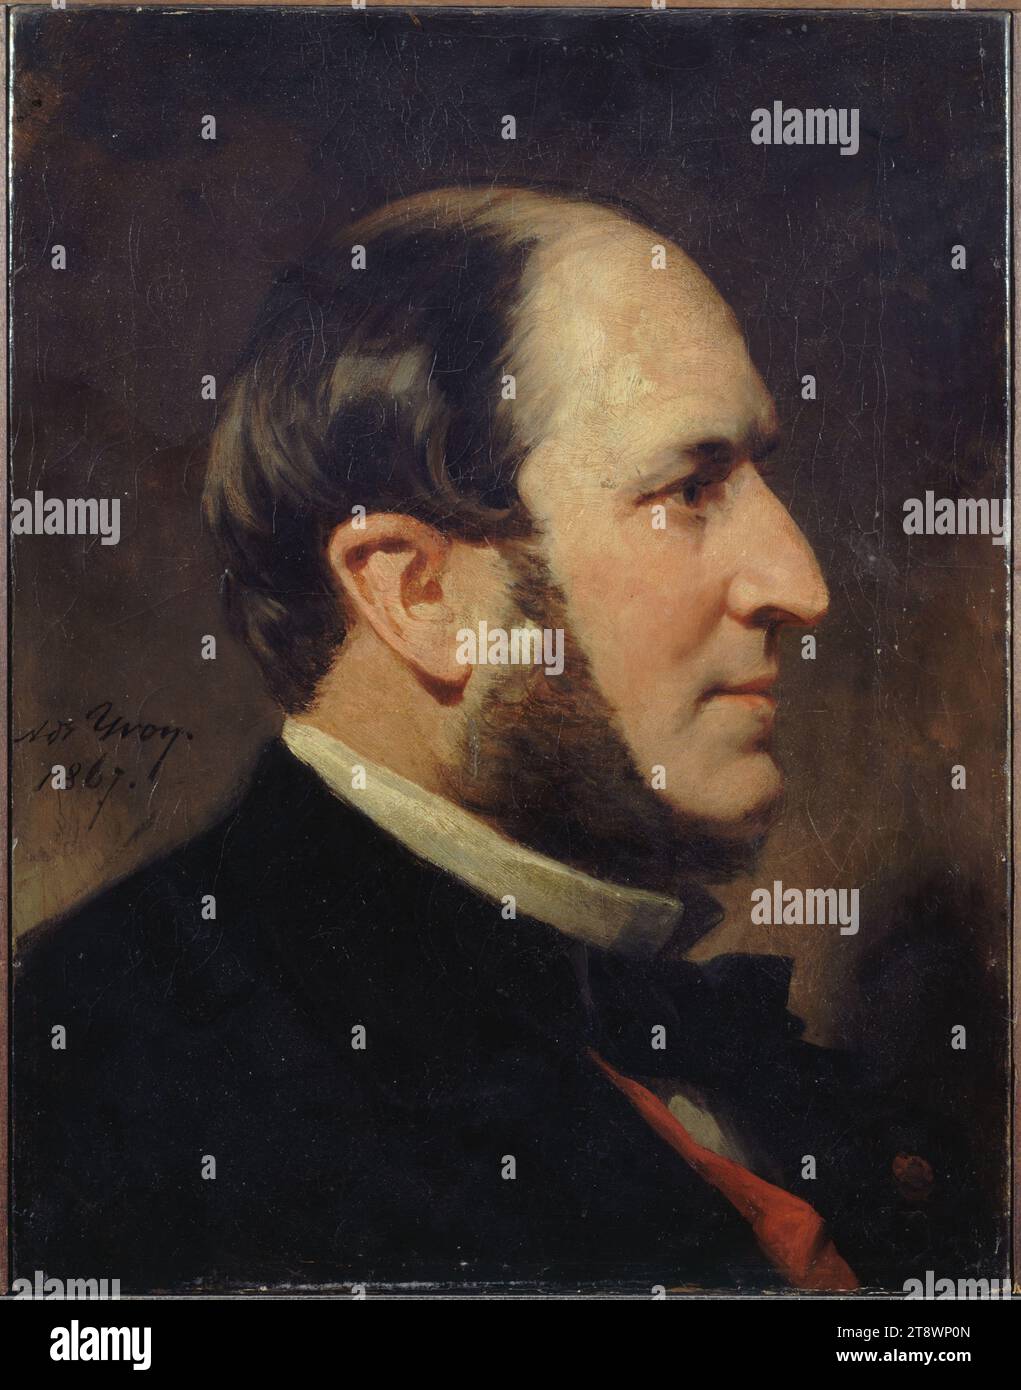 Portrait of Baron Haussmann (1809-1891), prefect of the Seine, Yvon, Frédéric Adolphe, Array, Painting, Height: 69.2 cm, Width: 60.1 cm, Thickness: 9.5 cm Stock Photo